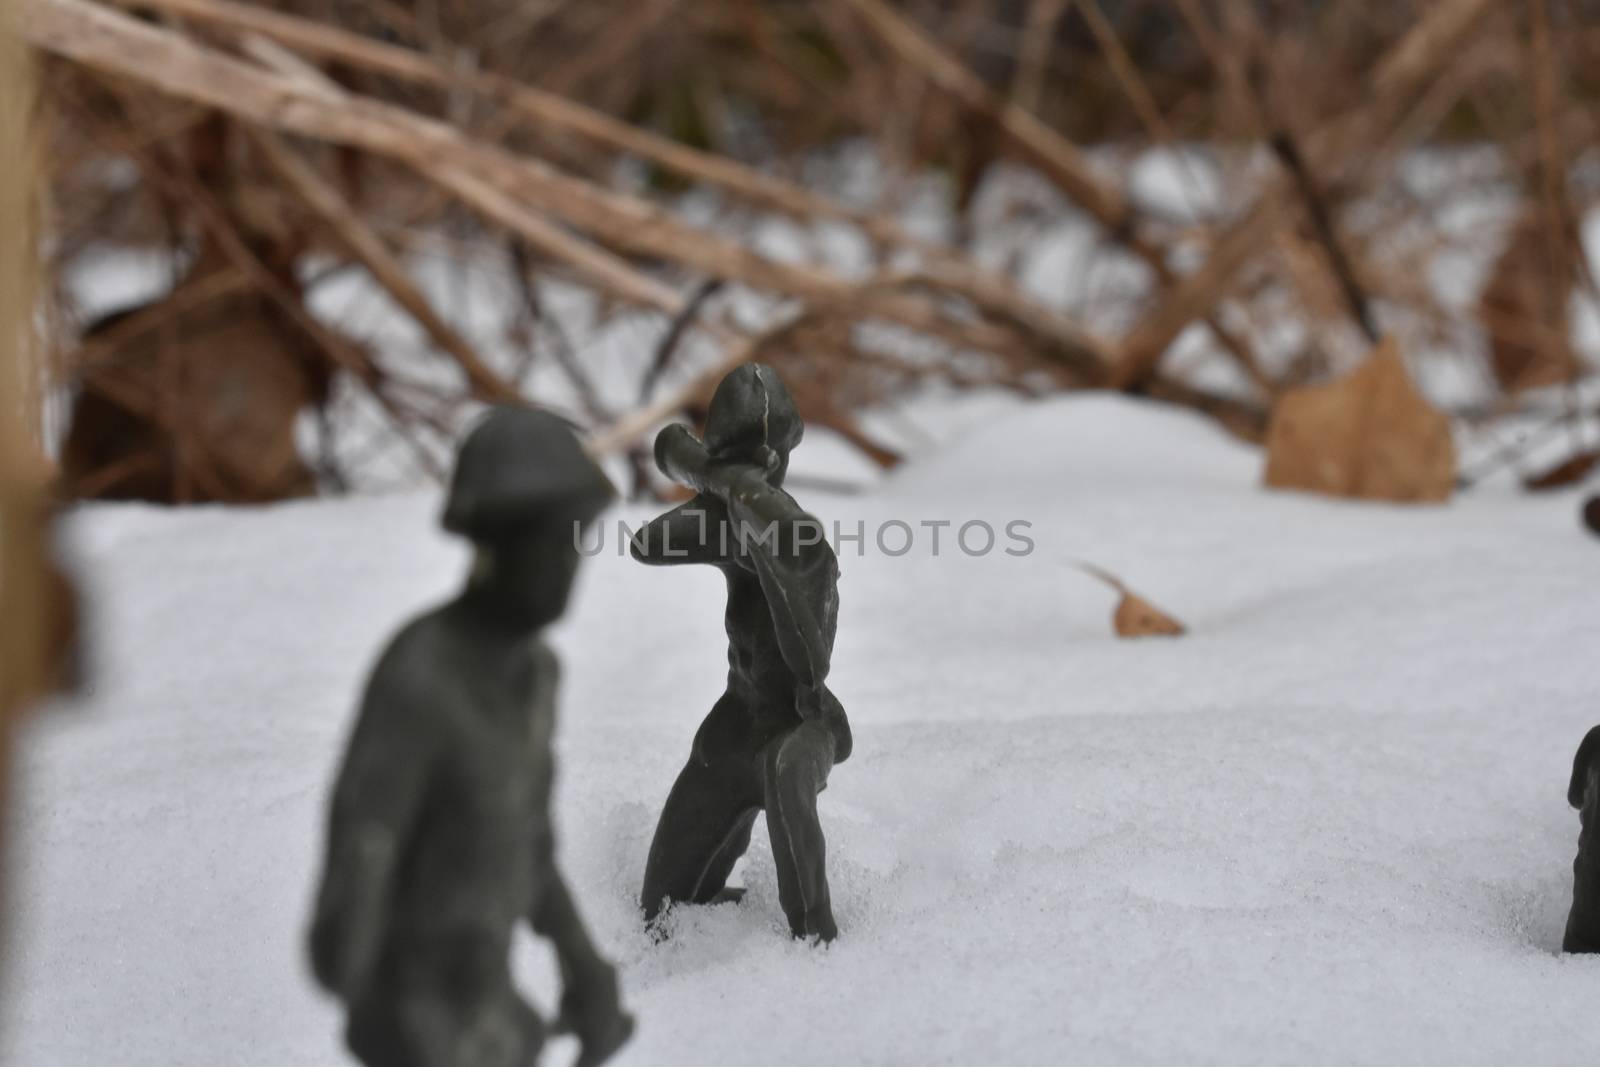 A Toy Soldier Taking Aim and Ready to Fight in a Snowy Field by bju12290